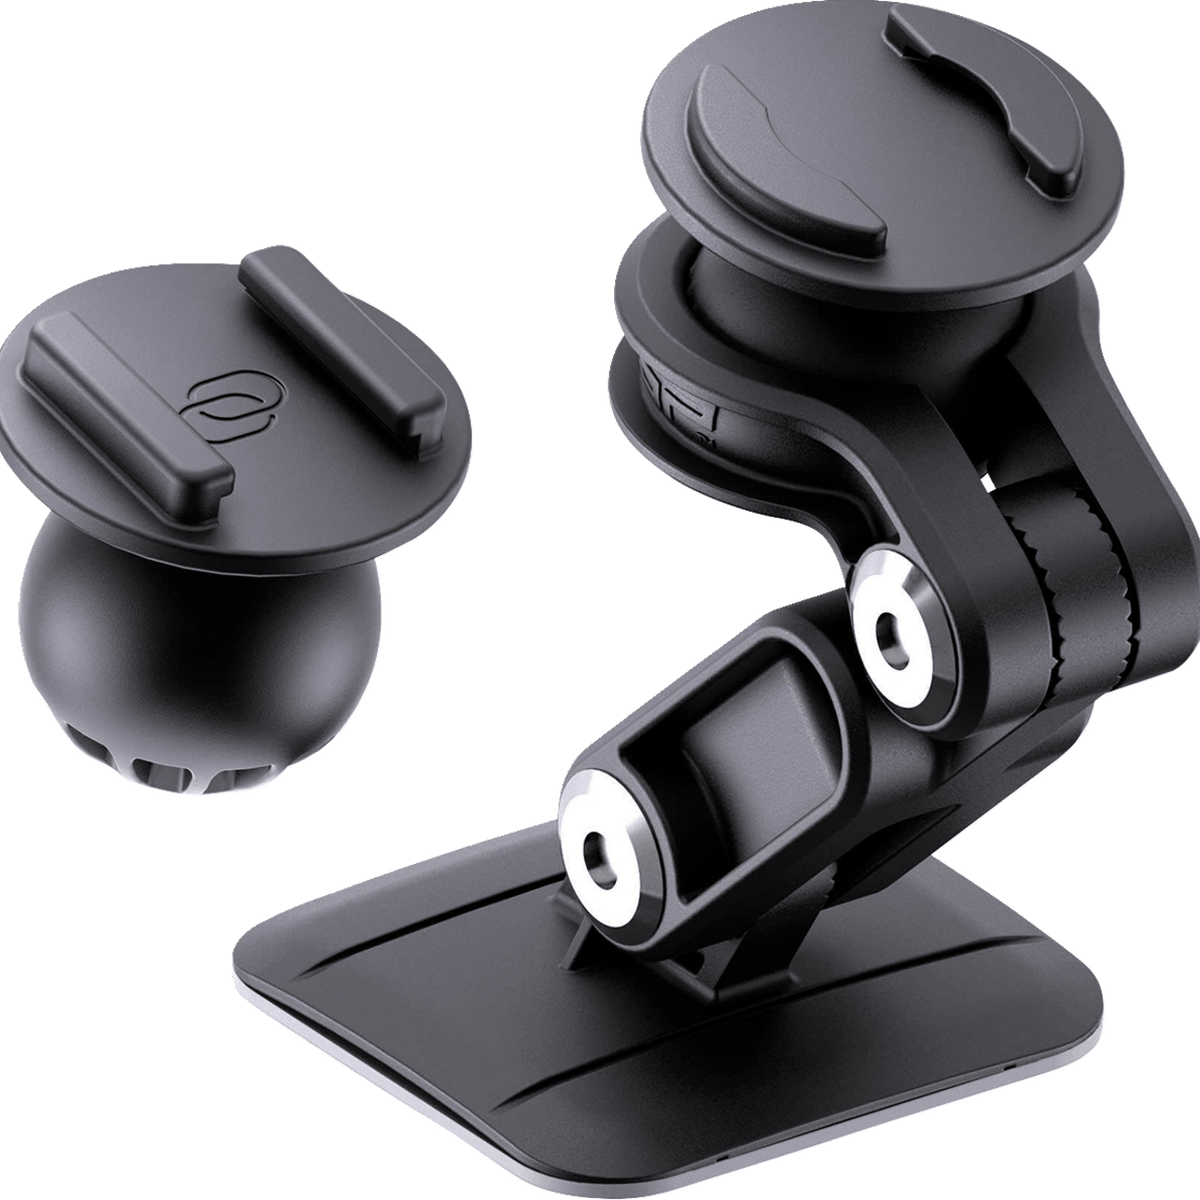 SP Connect Phone Mount: Secure Viewing on the Go